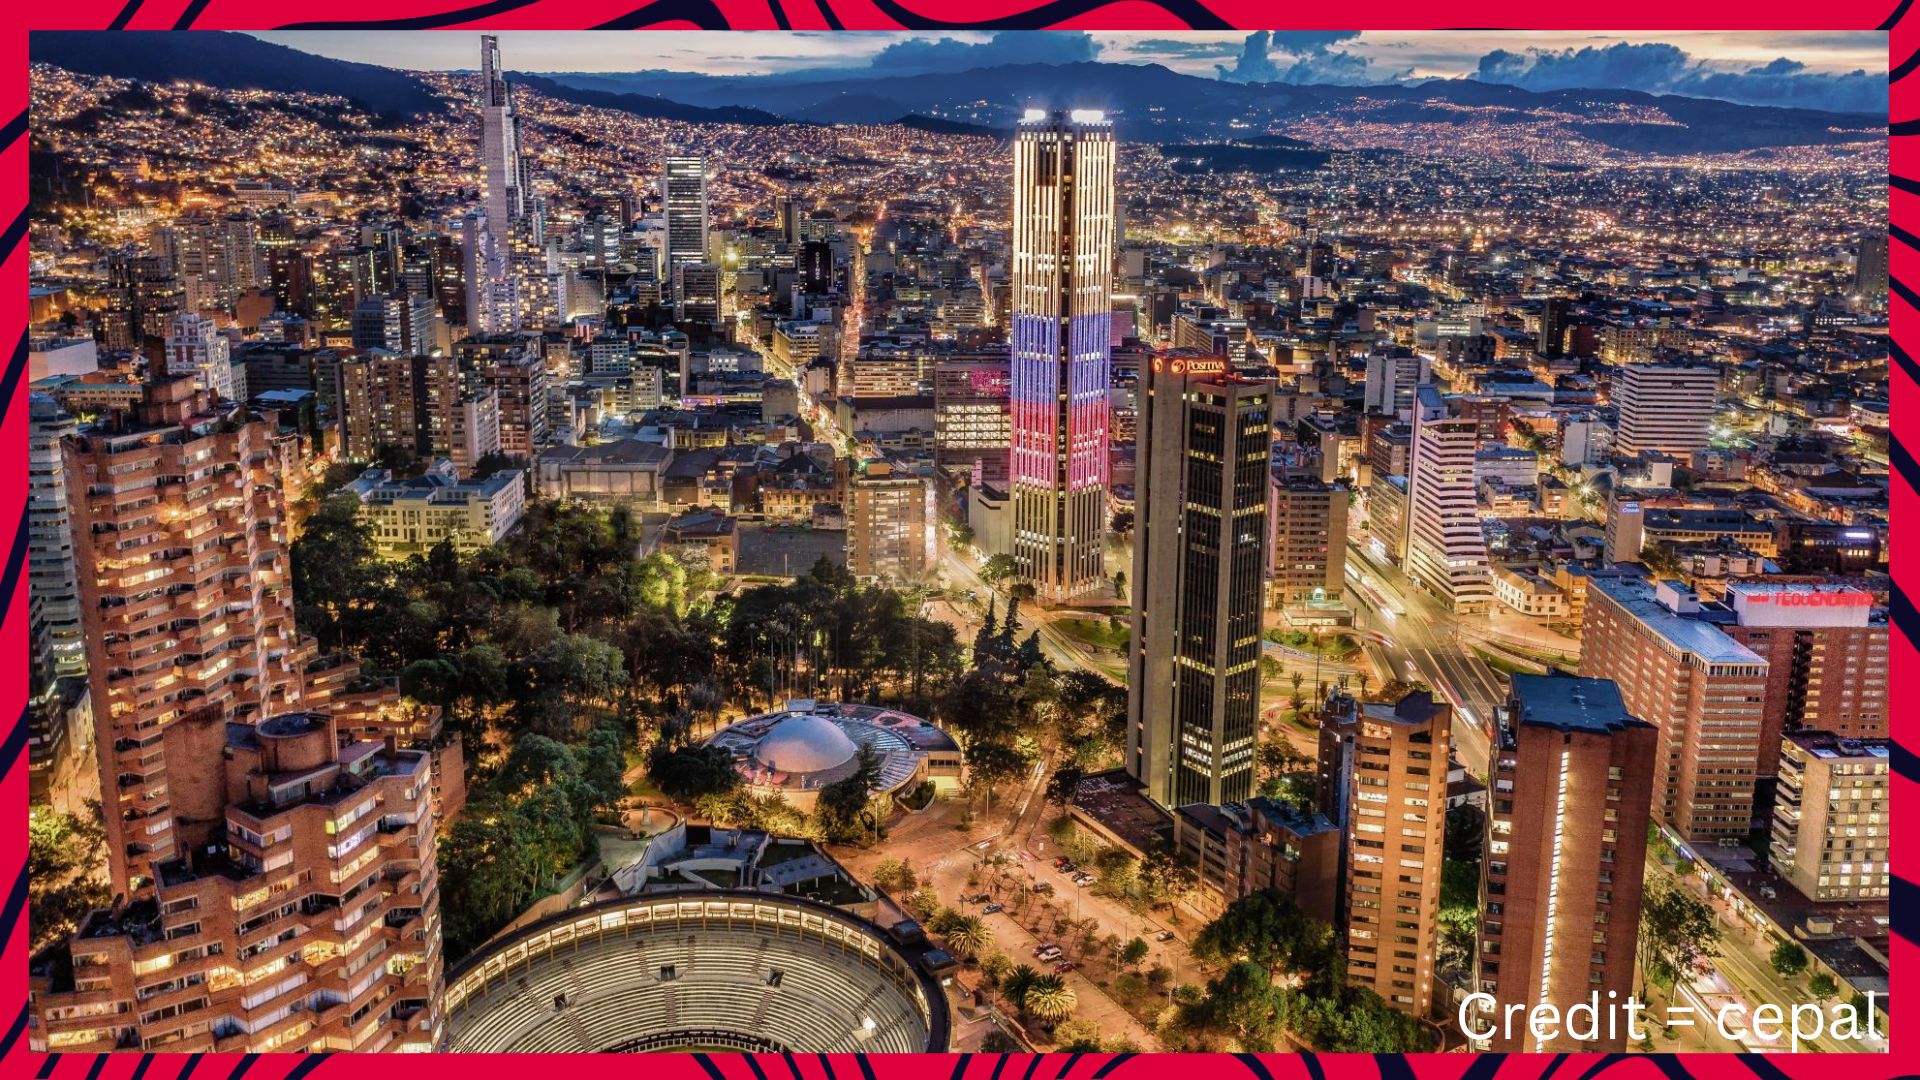 Bogotá is the 3rd most popular city in South America. Colombia is the 3rd most popular South American country in the world.